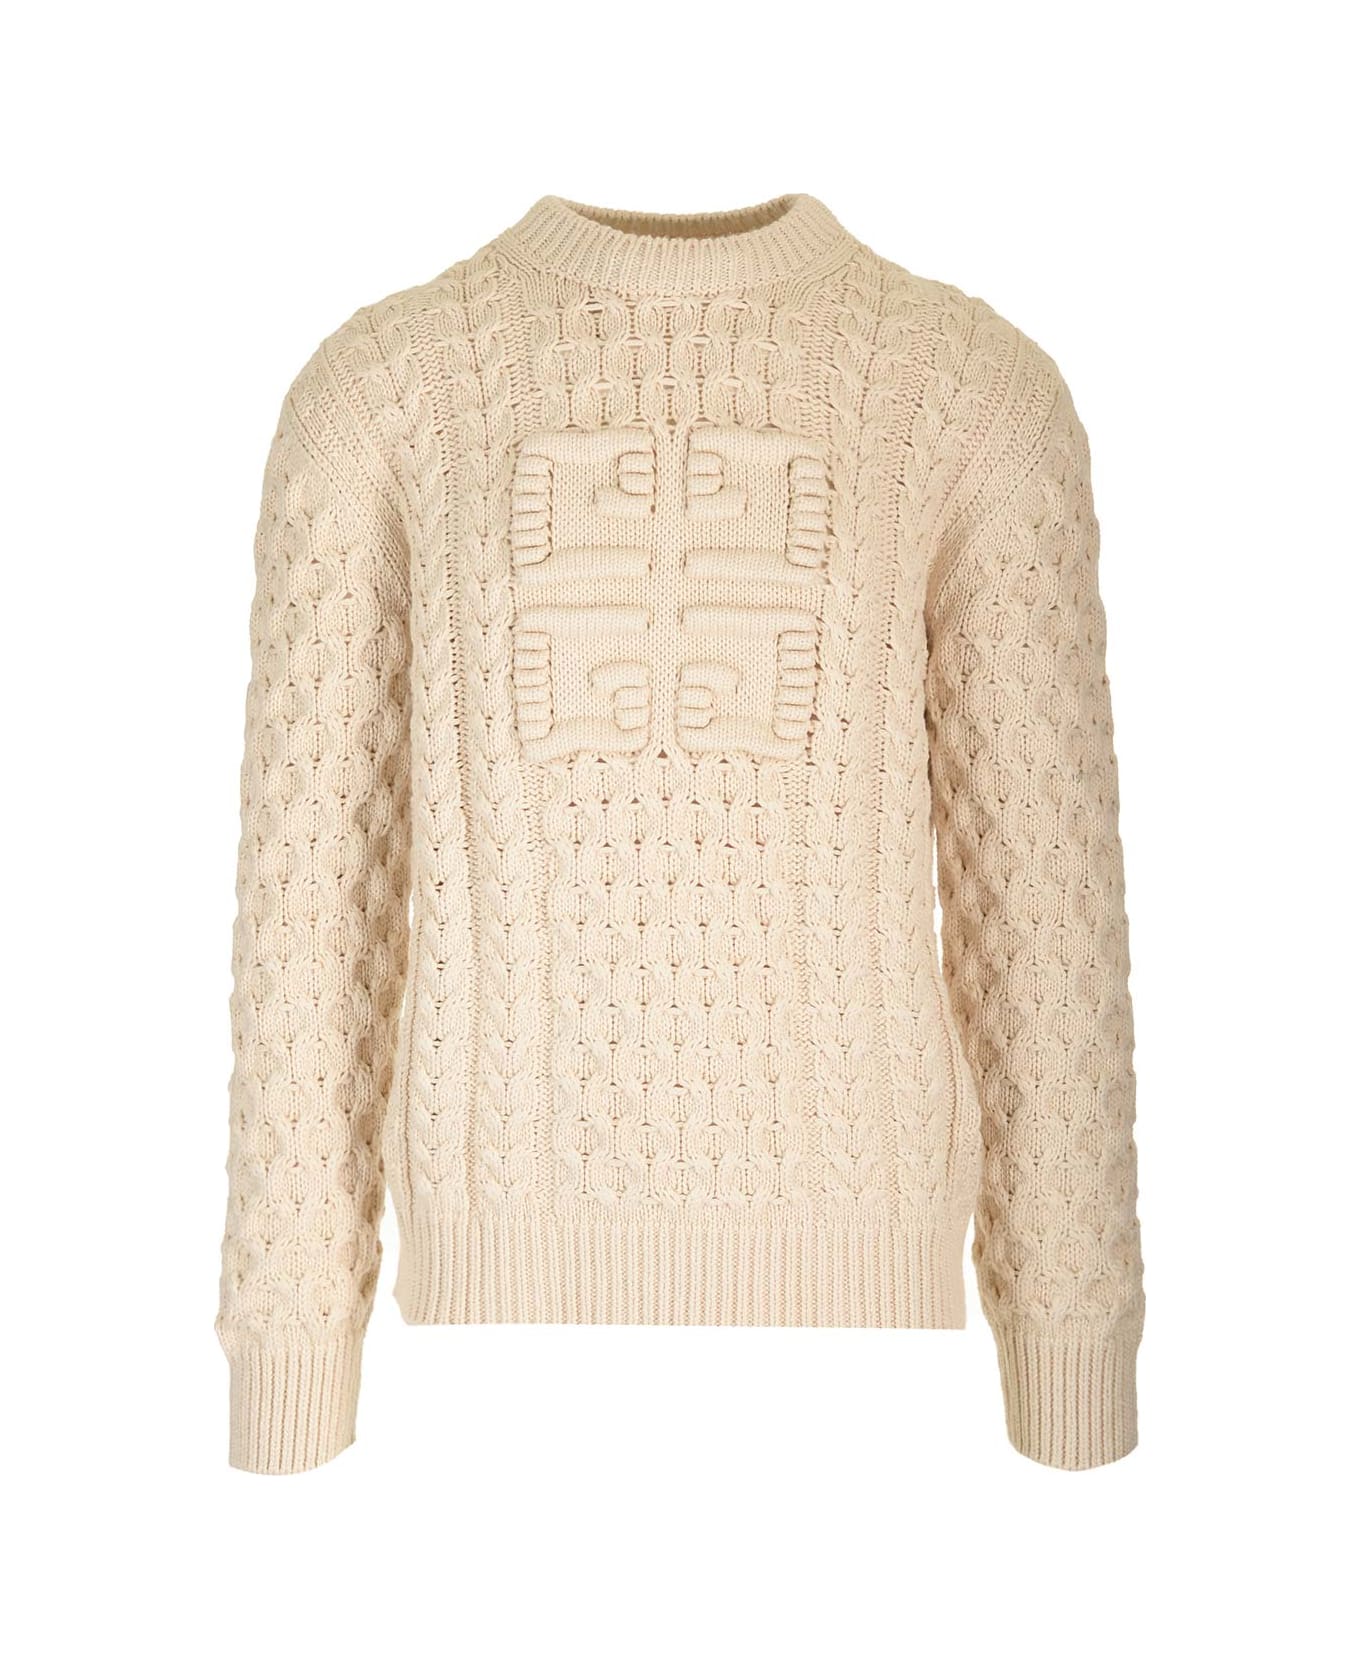 Givenchy '4g' Pullover - White